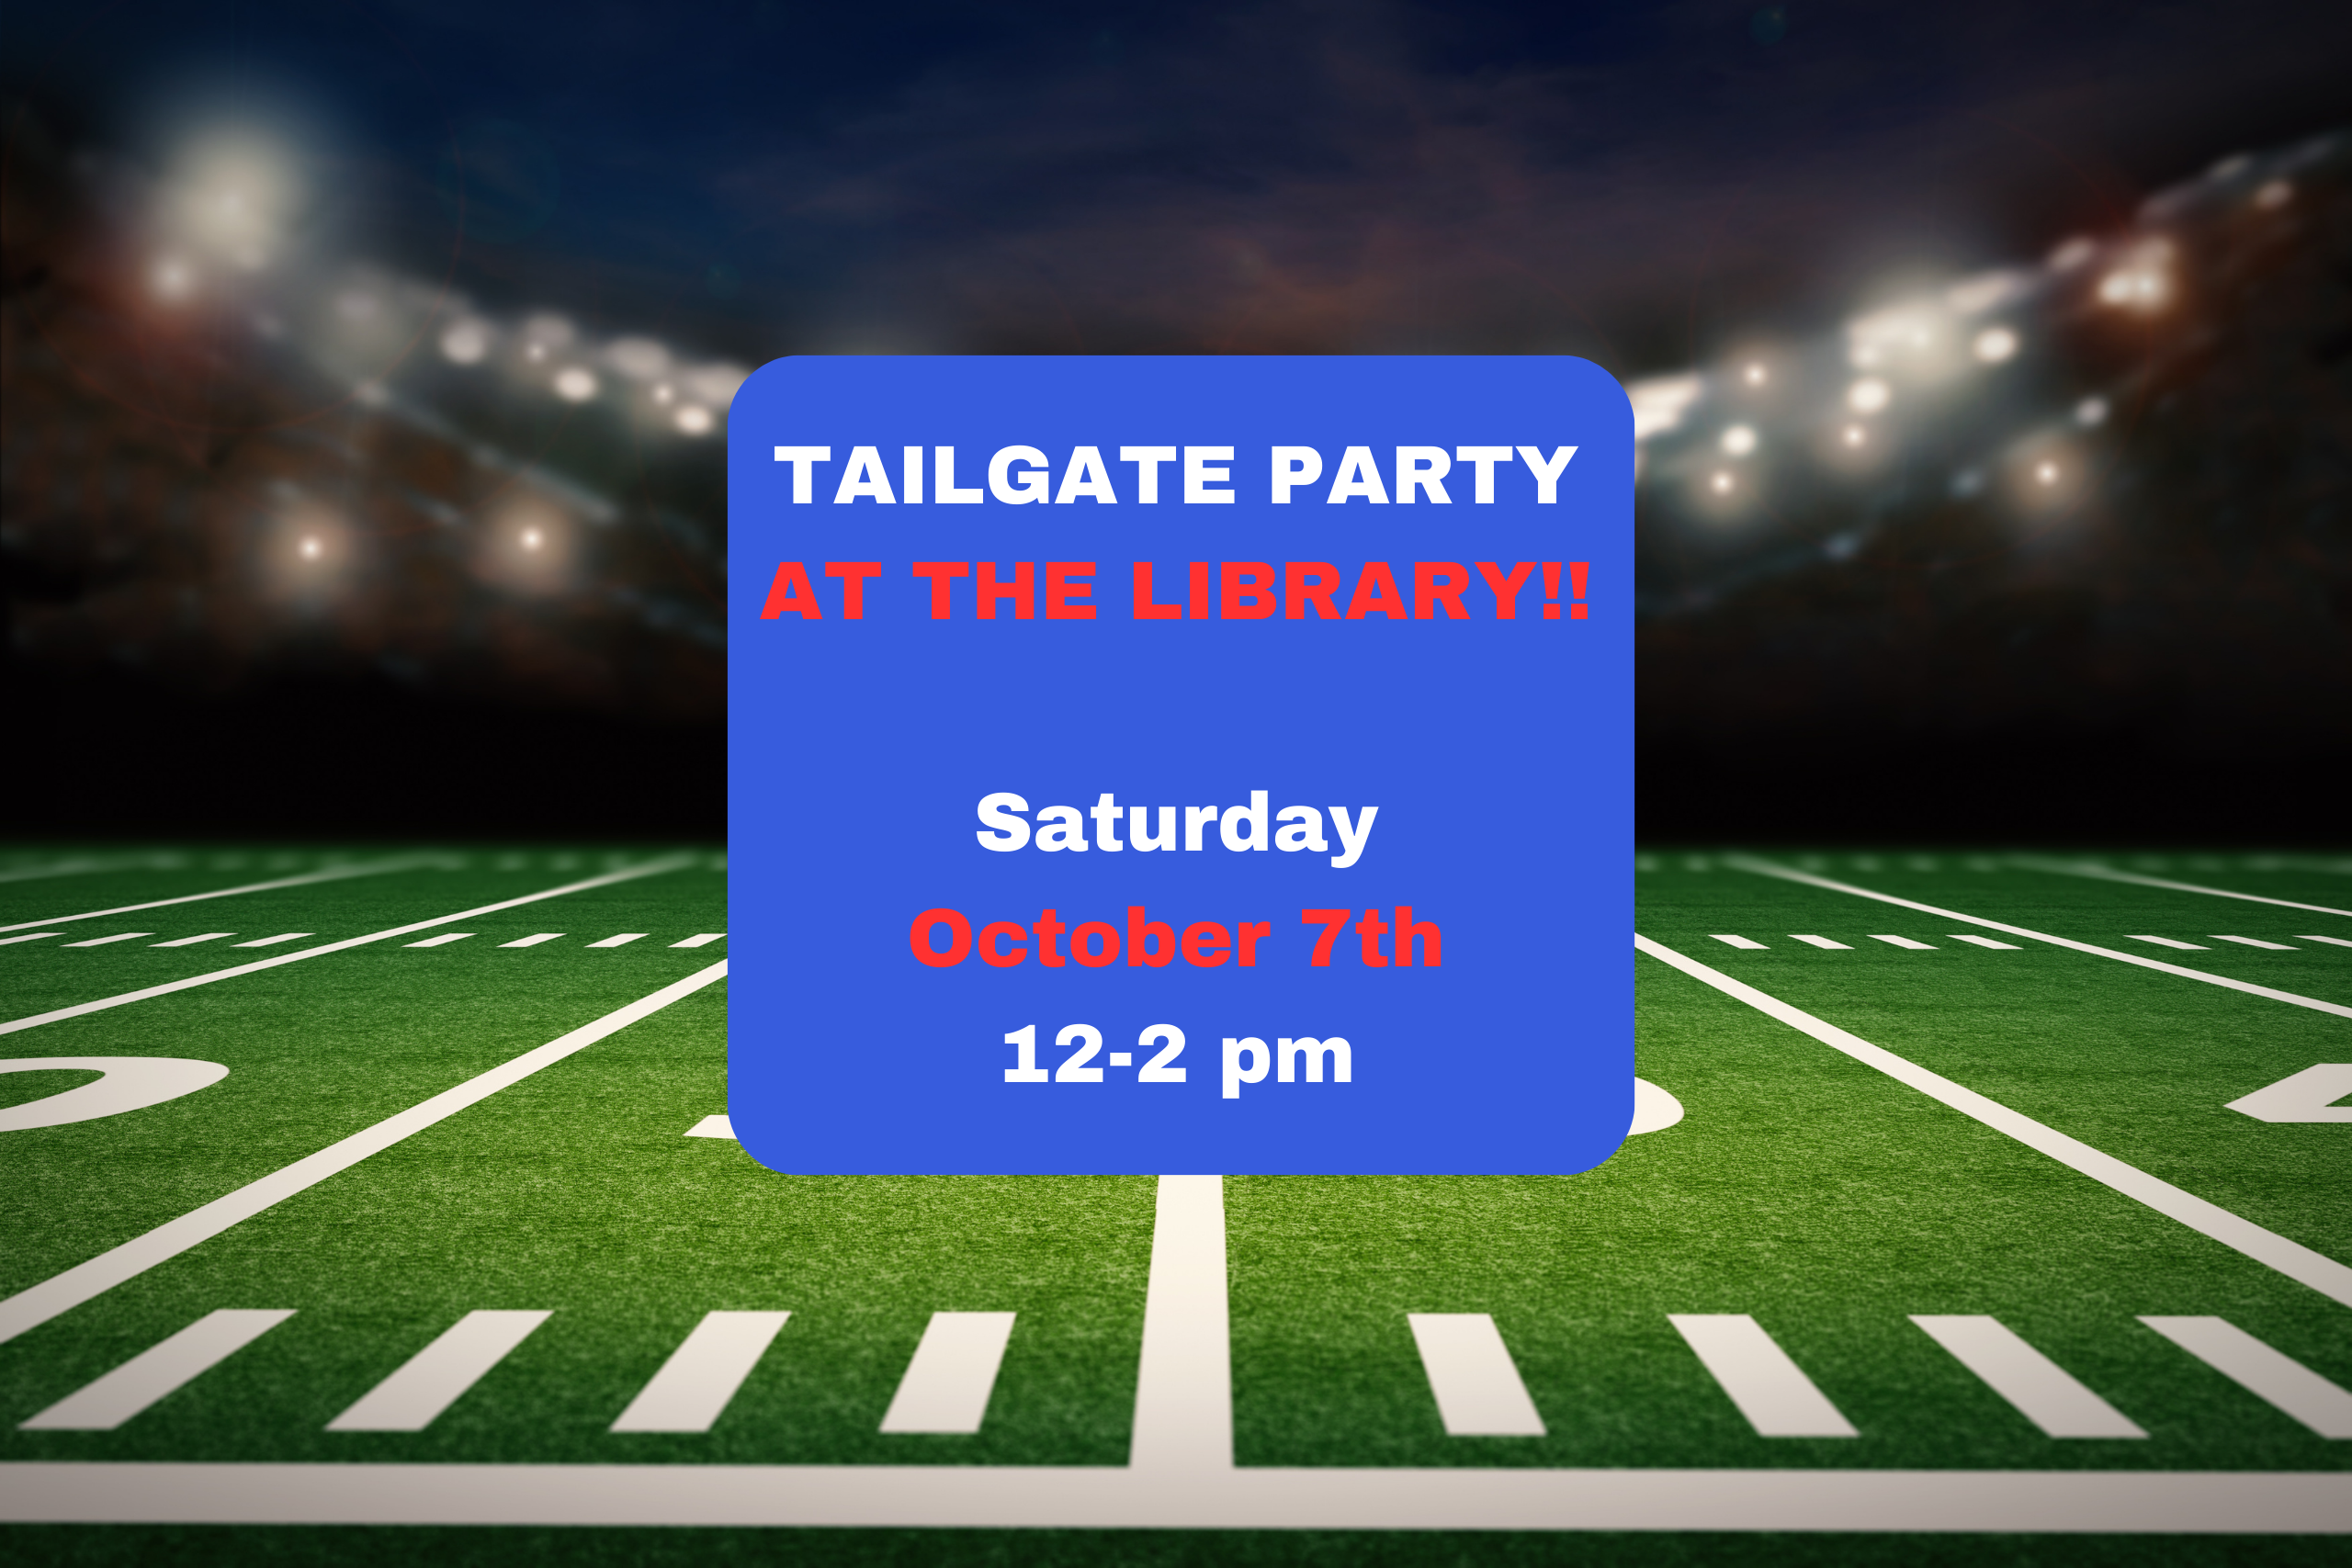 Tailgate Party at the Library